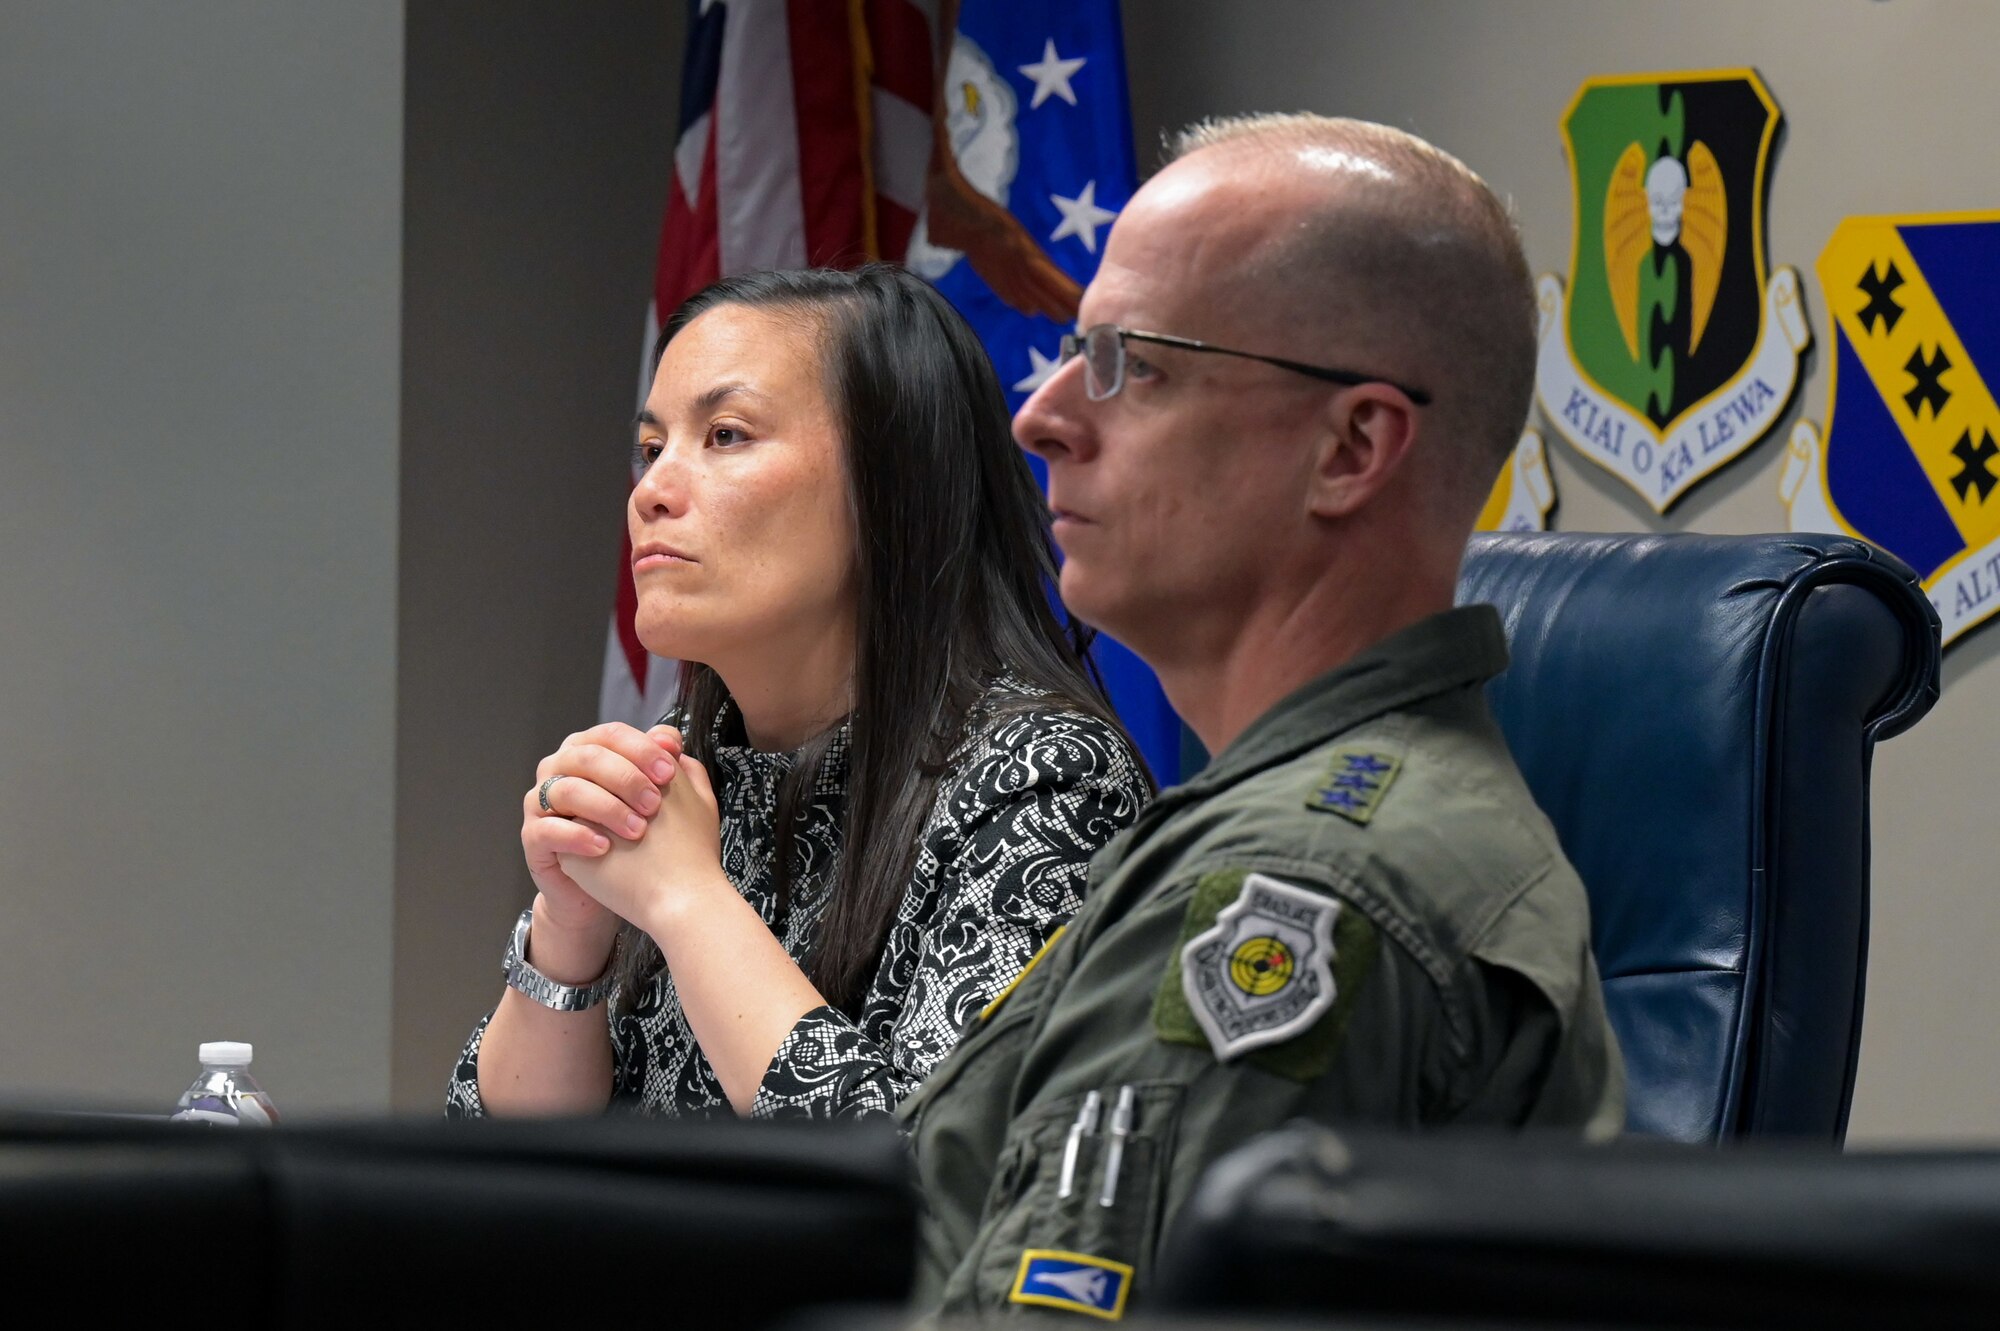 The Honorable Gina Ortiz Jones, Under Secretary of the Air Force, attends an Air Force Global Strike Command mission brief and portfolio modernization during a visit to Barksdale Air Force Base, Louisiana, April 12, 2022. Jones visited Barksdale to meet with AFGSC leaders to see firsthand missions and innovations within the MAJCOM. (U.S. Air Force photo by Senior Airman Jonathan E. Ramos)